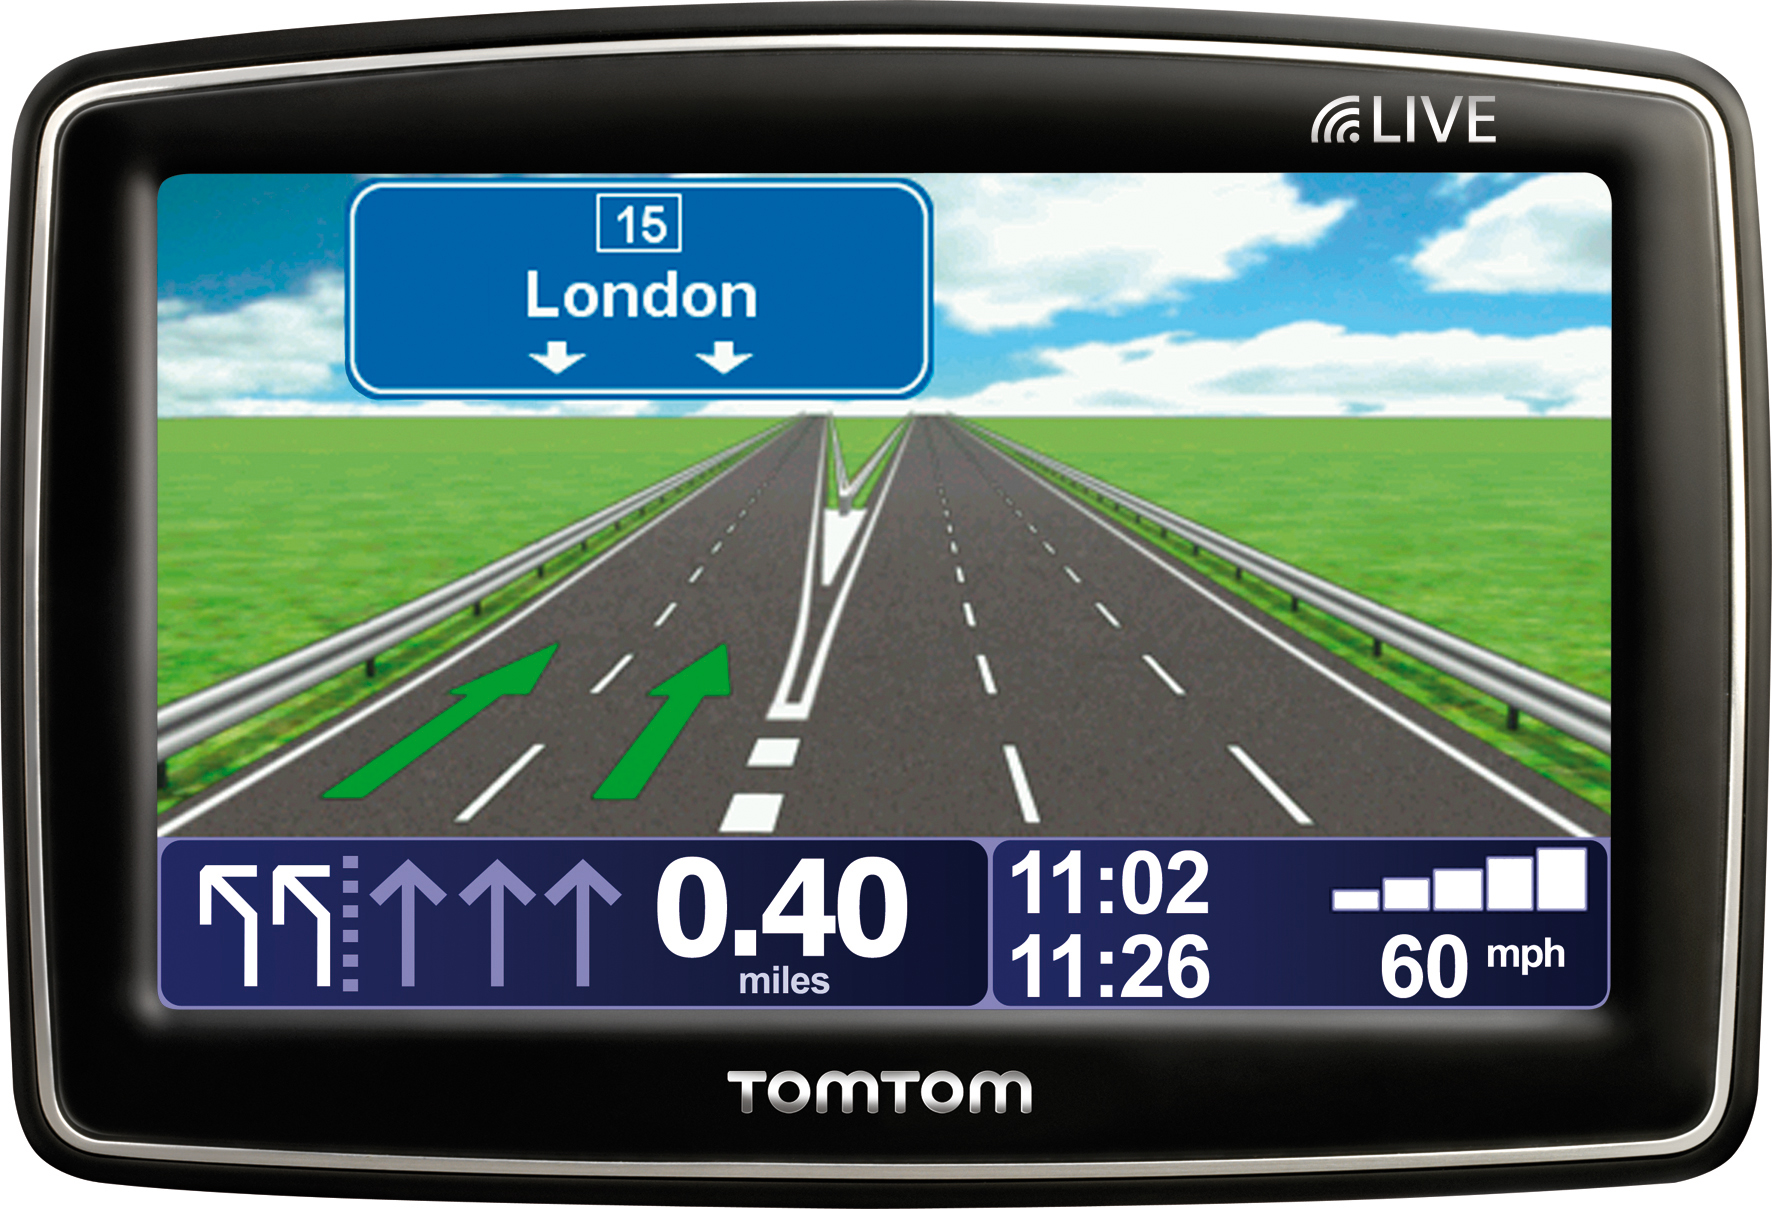 tomtom home map update